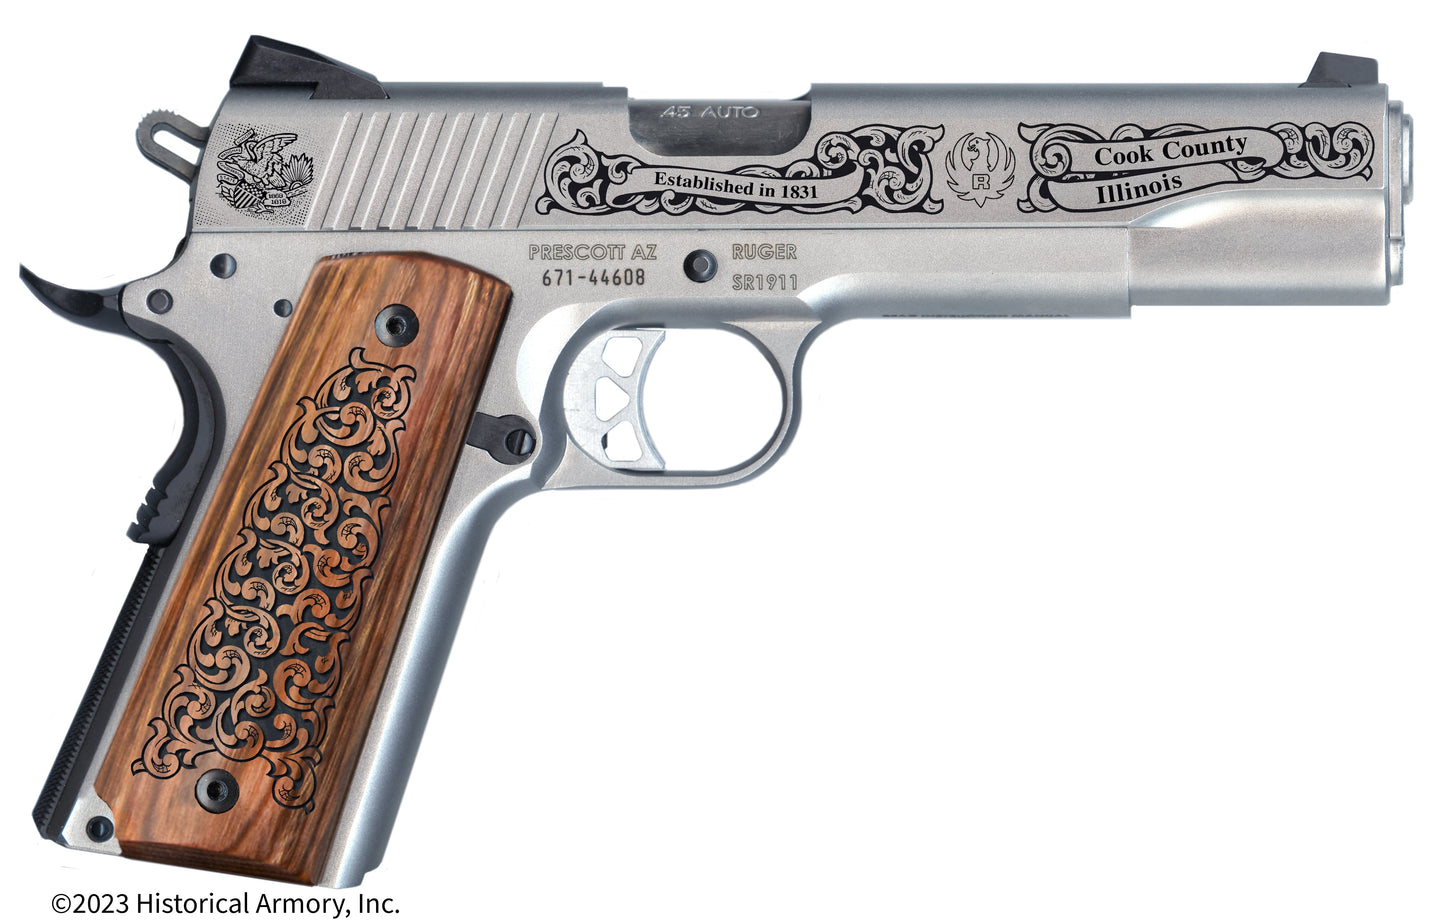 Cook County Illinois Engraved .45 Auto Ruger 1911